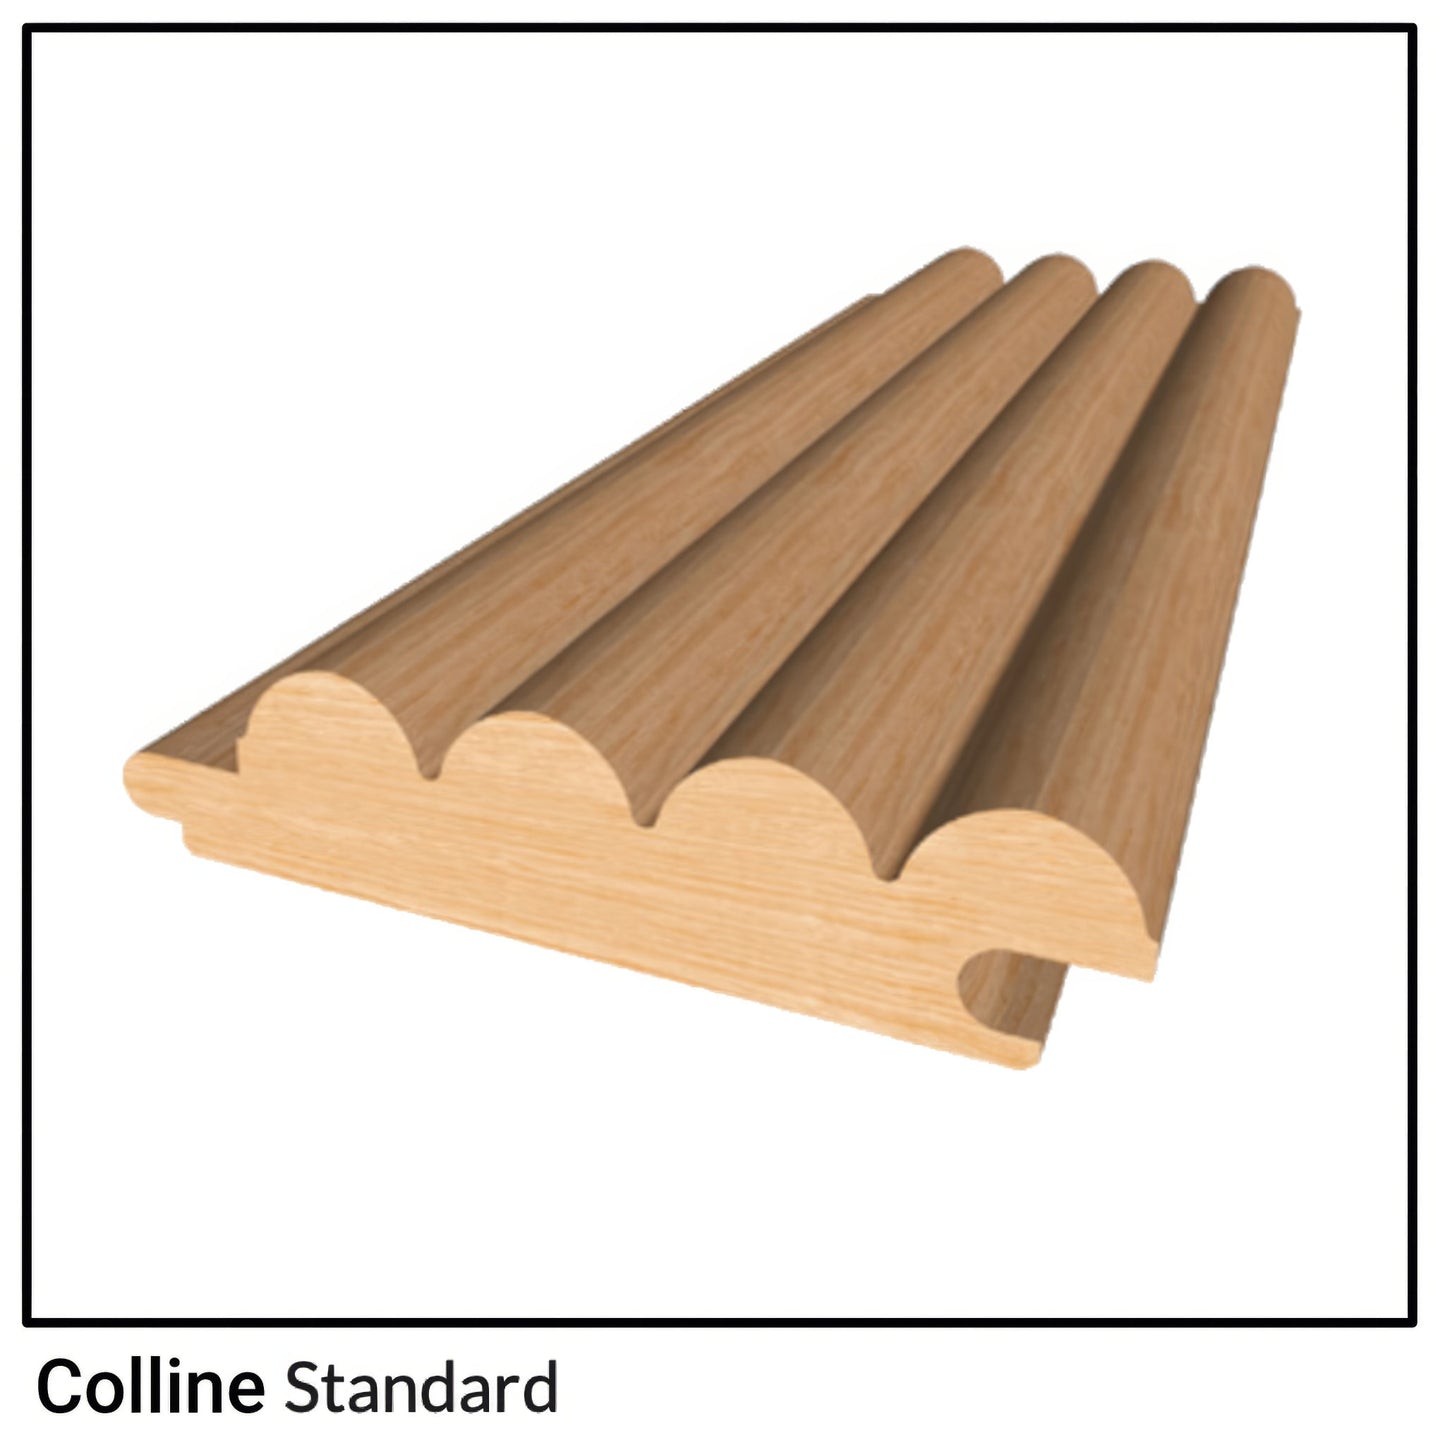 Solid Wood Moldings Profile collection